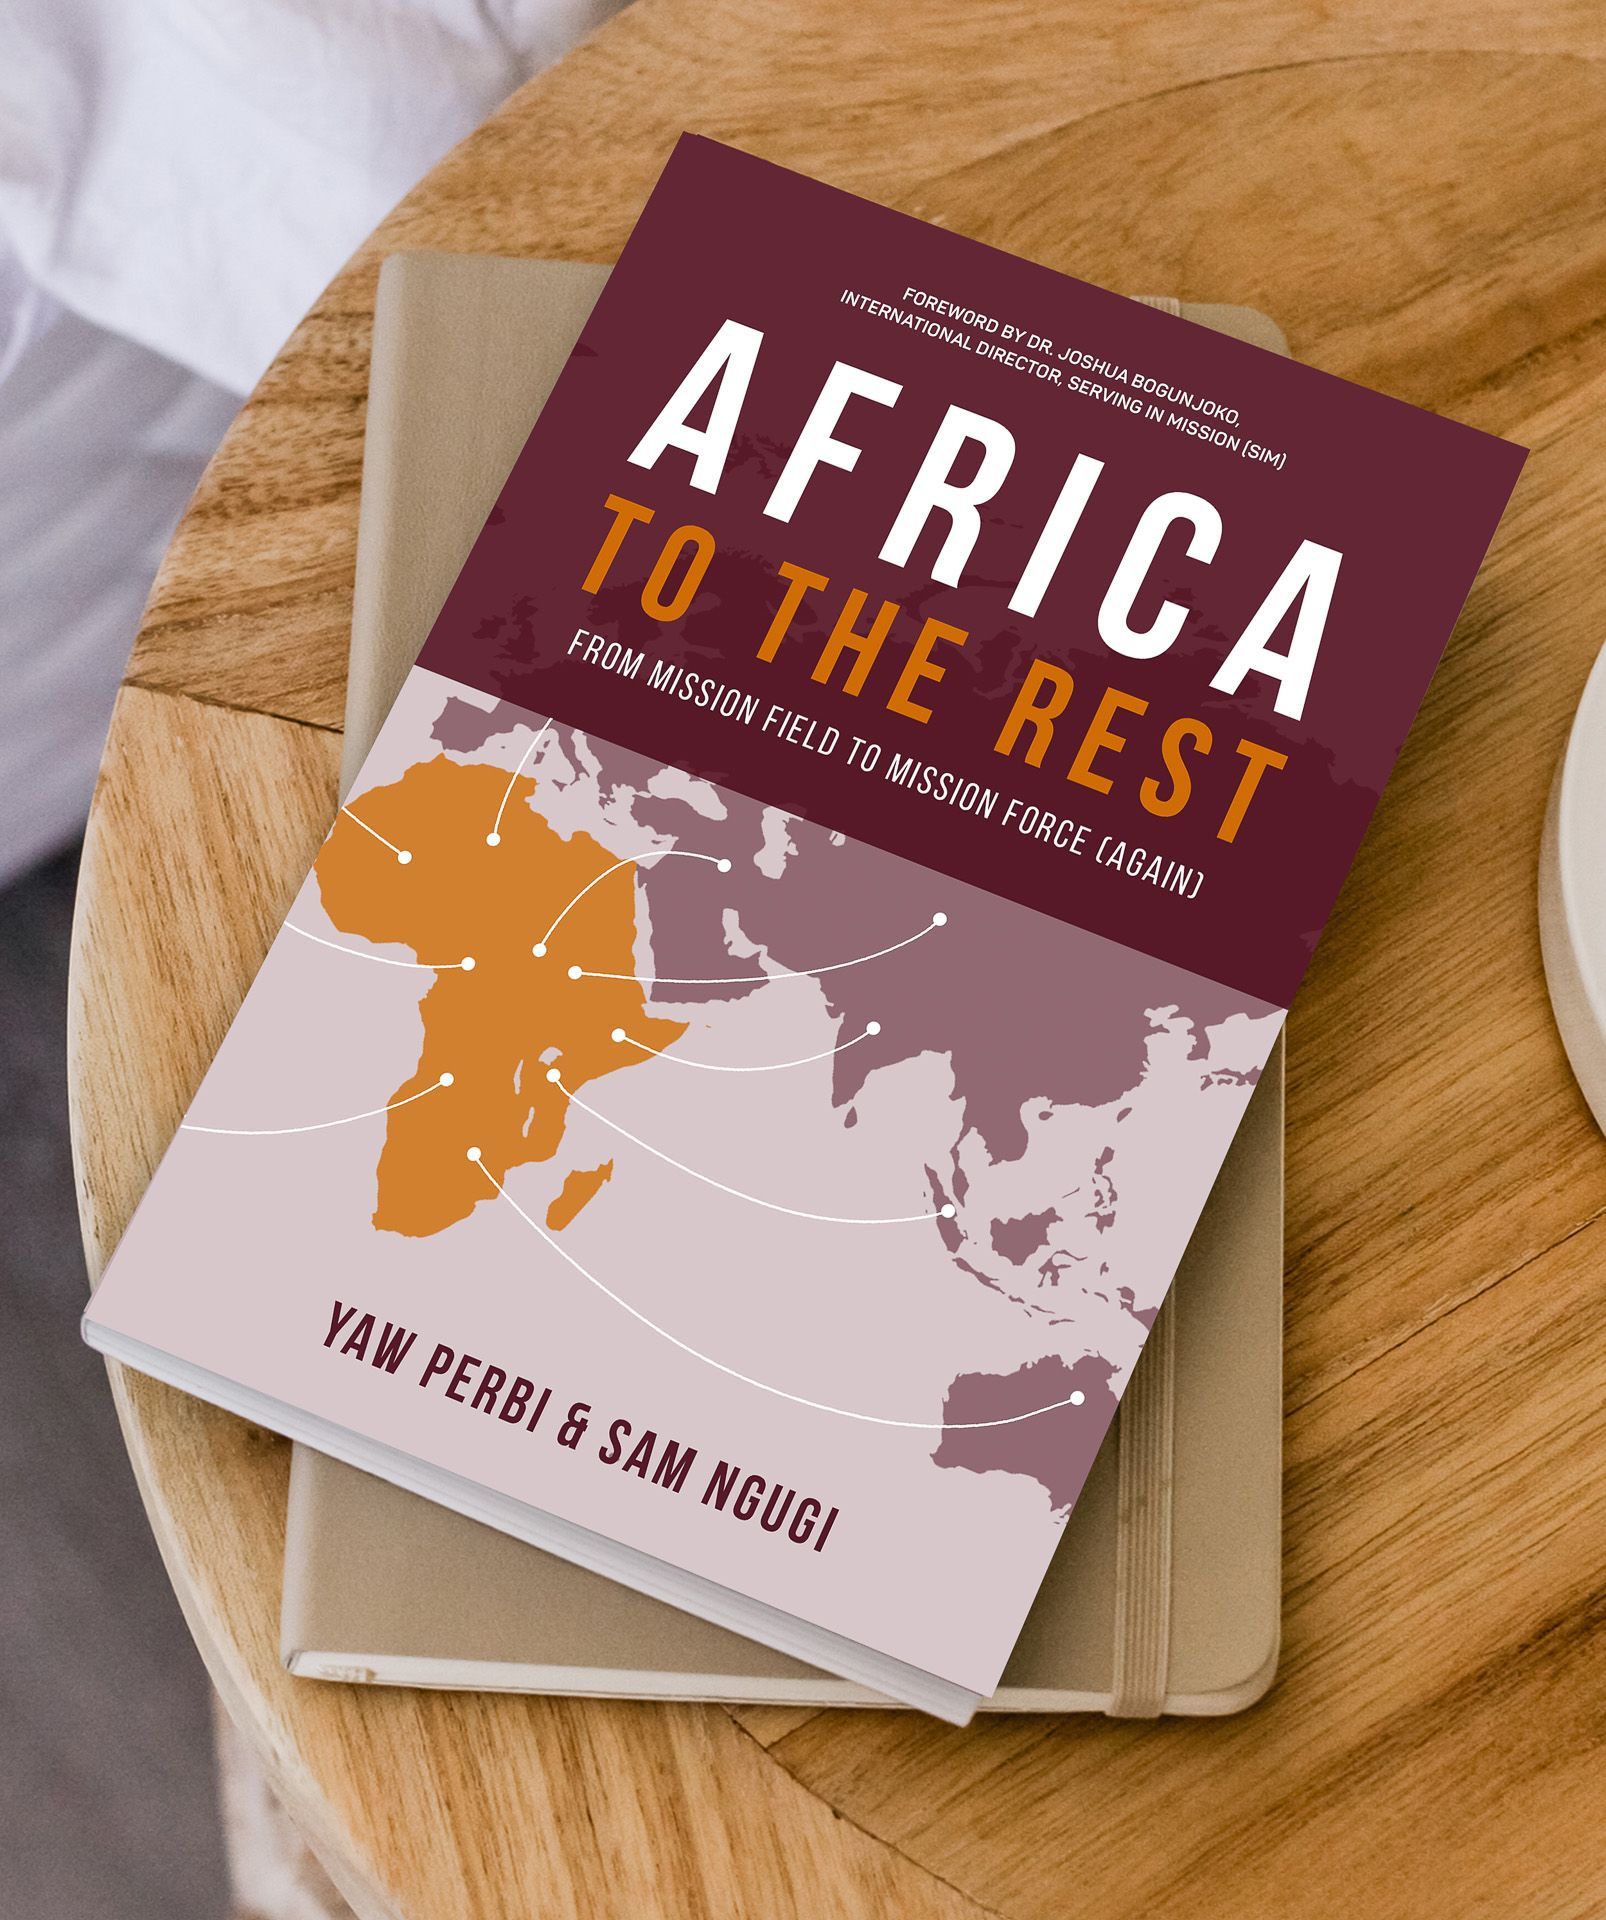 ThirdLaw branding and web design - Africa to the Rest Cover